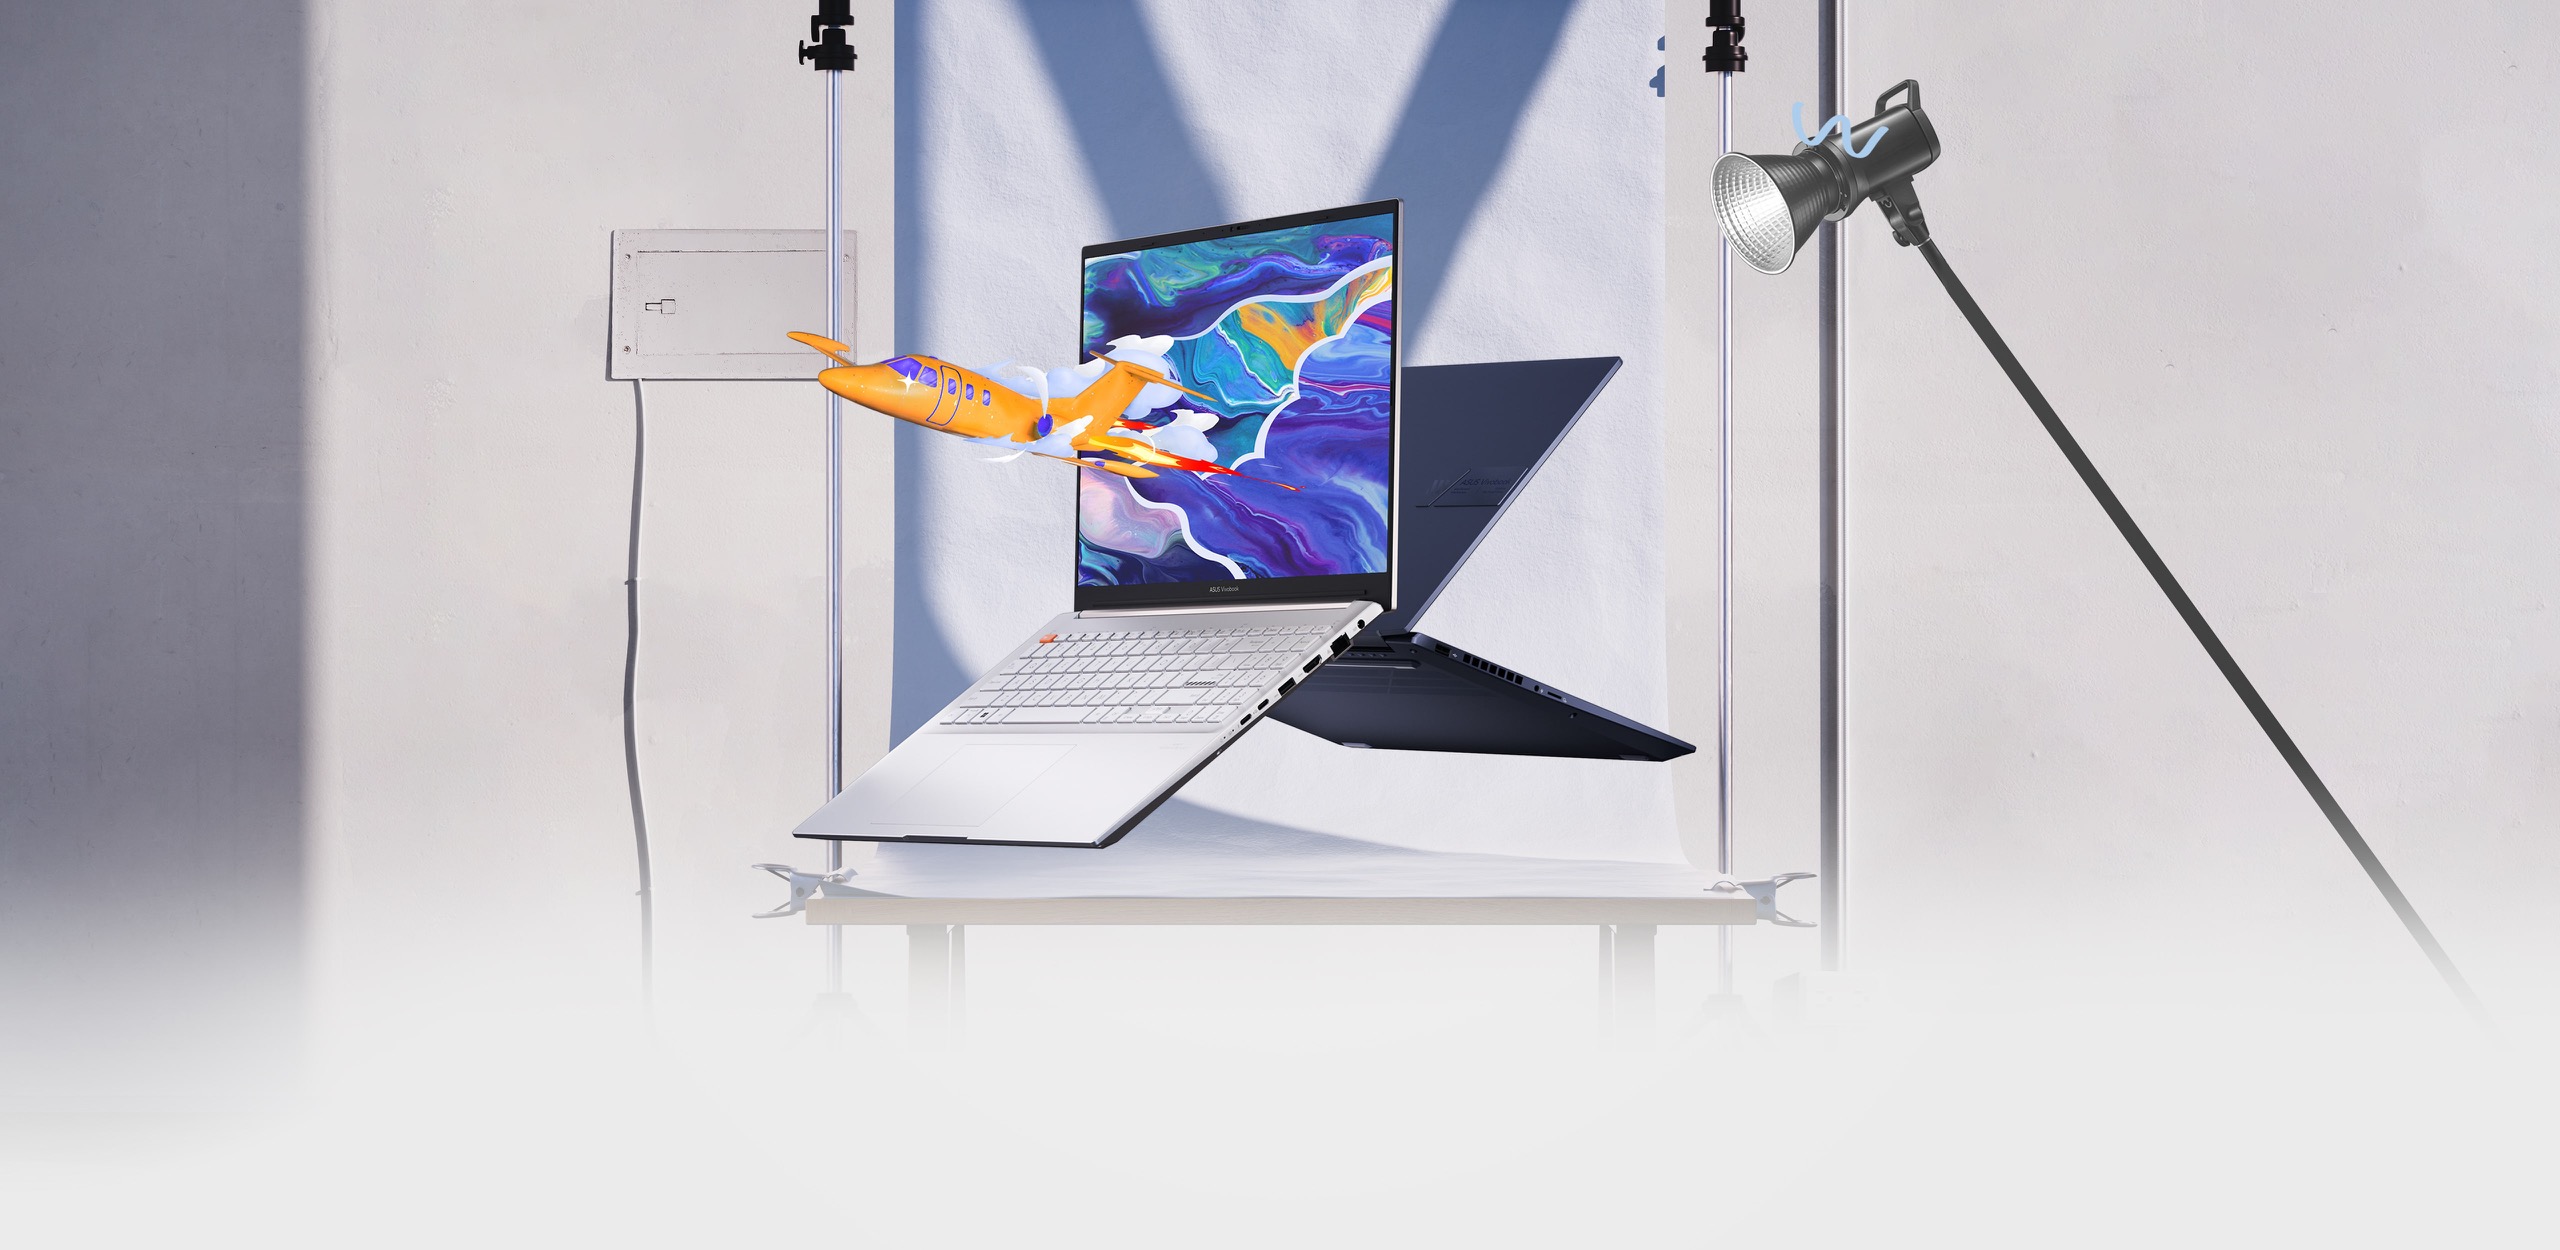 Two Vivobook Pro 16 OLED laptops in front and rear view, with one showing an airplane leaping out of a colorful graphic on the screen.